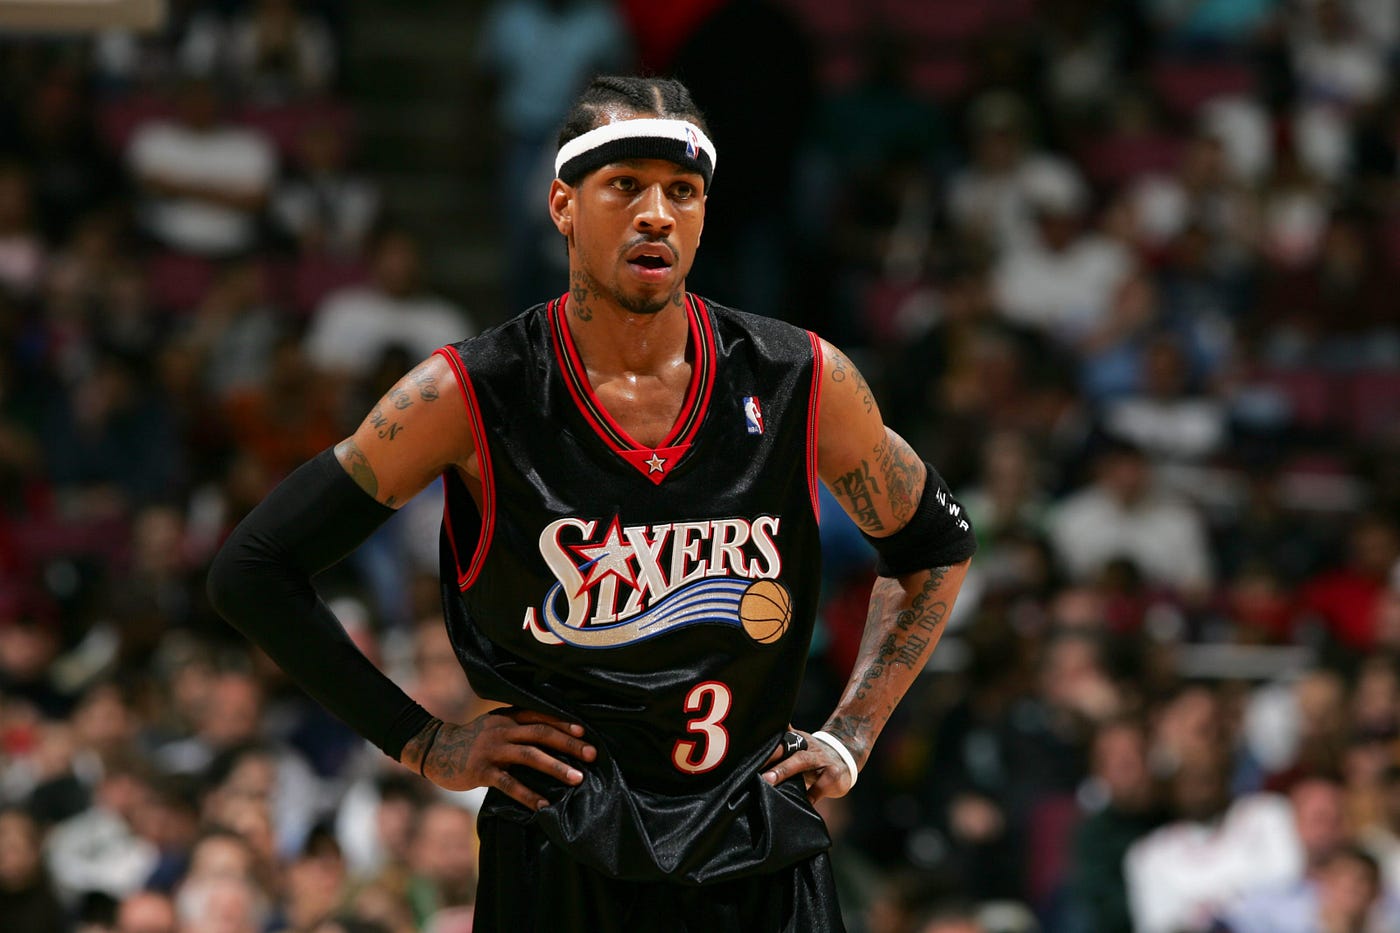 Shaquille O'Neal, Allen Iverson among defining players of post